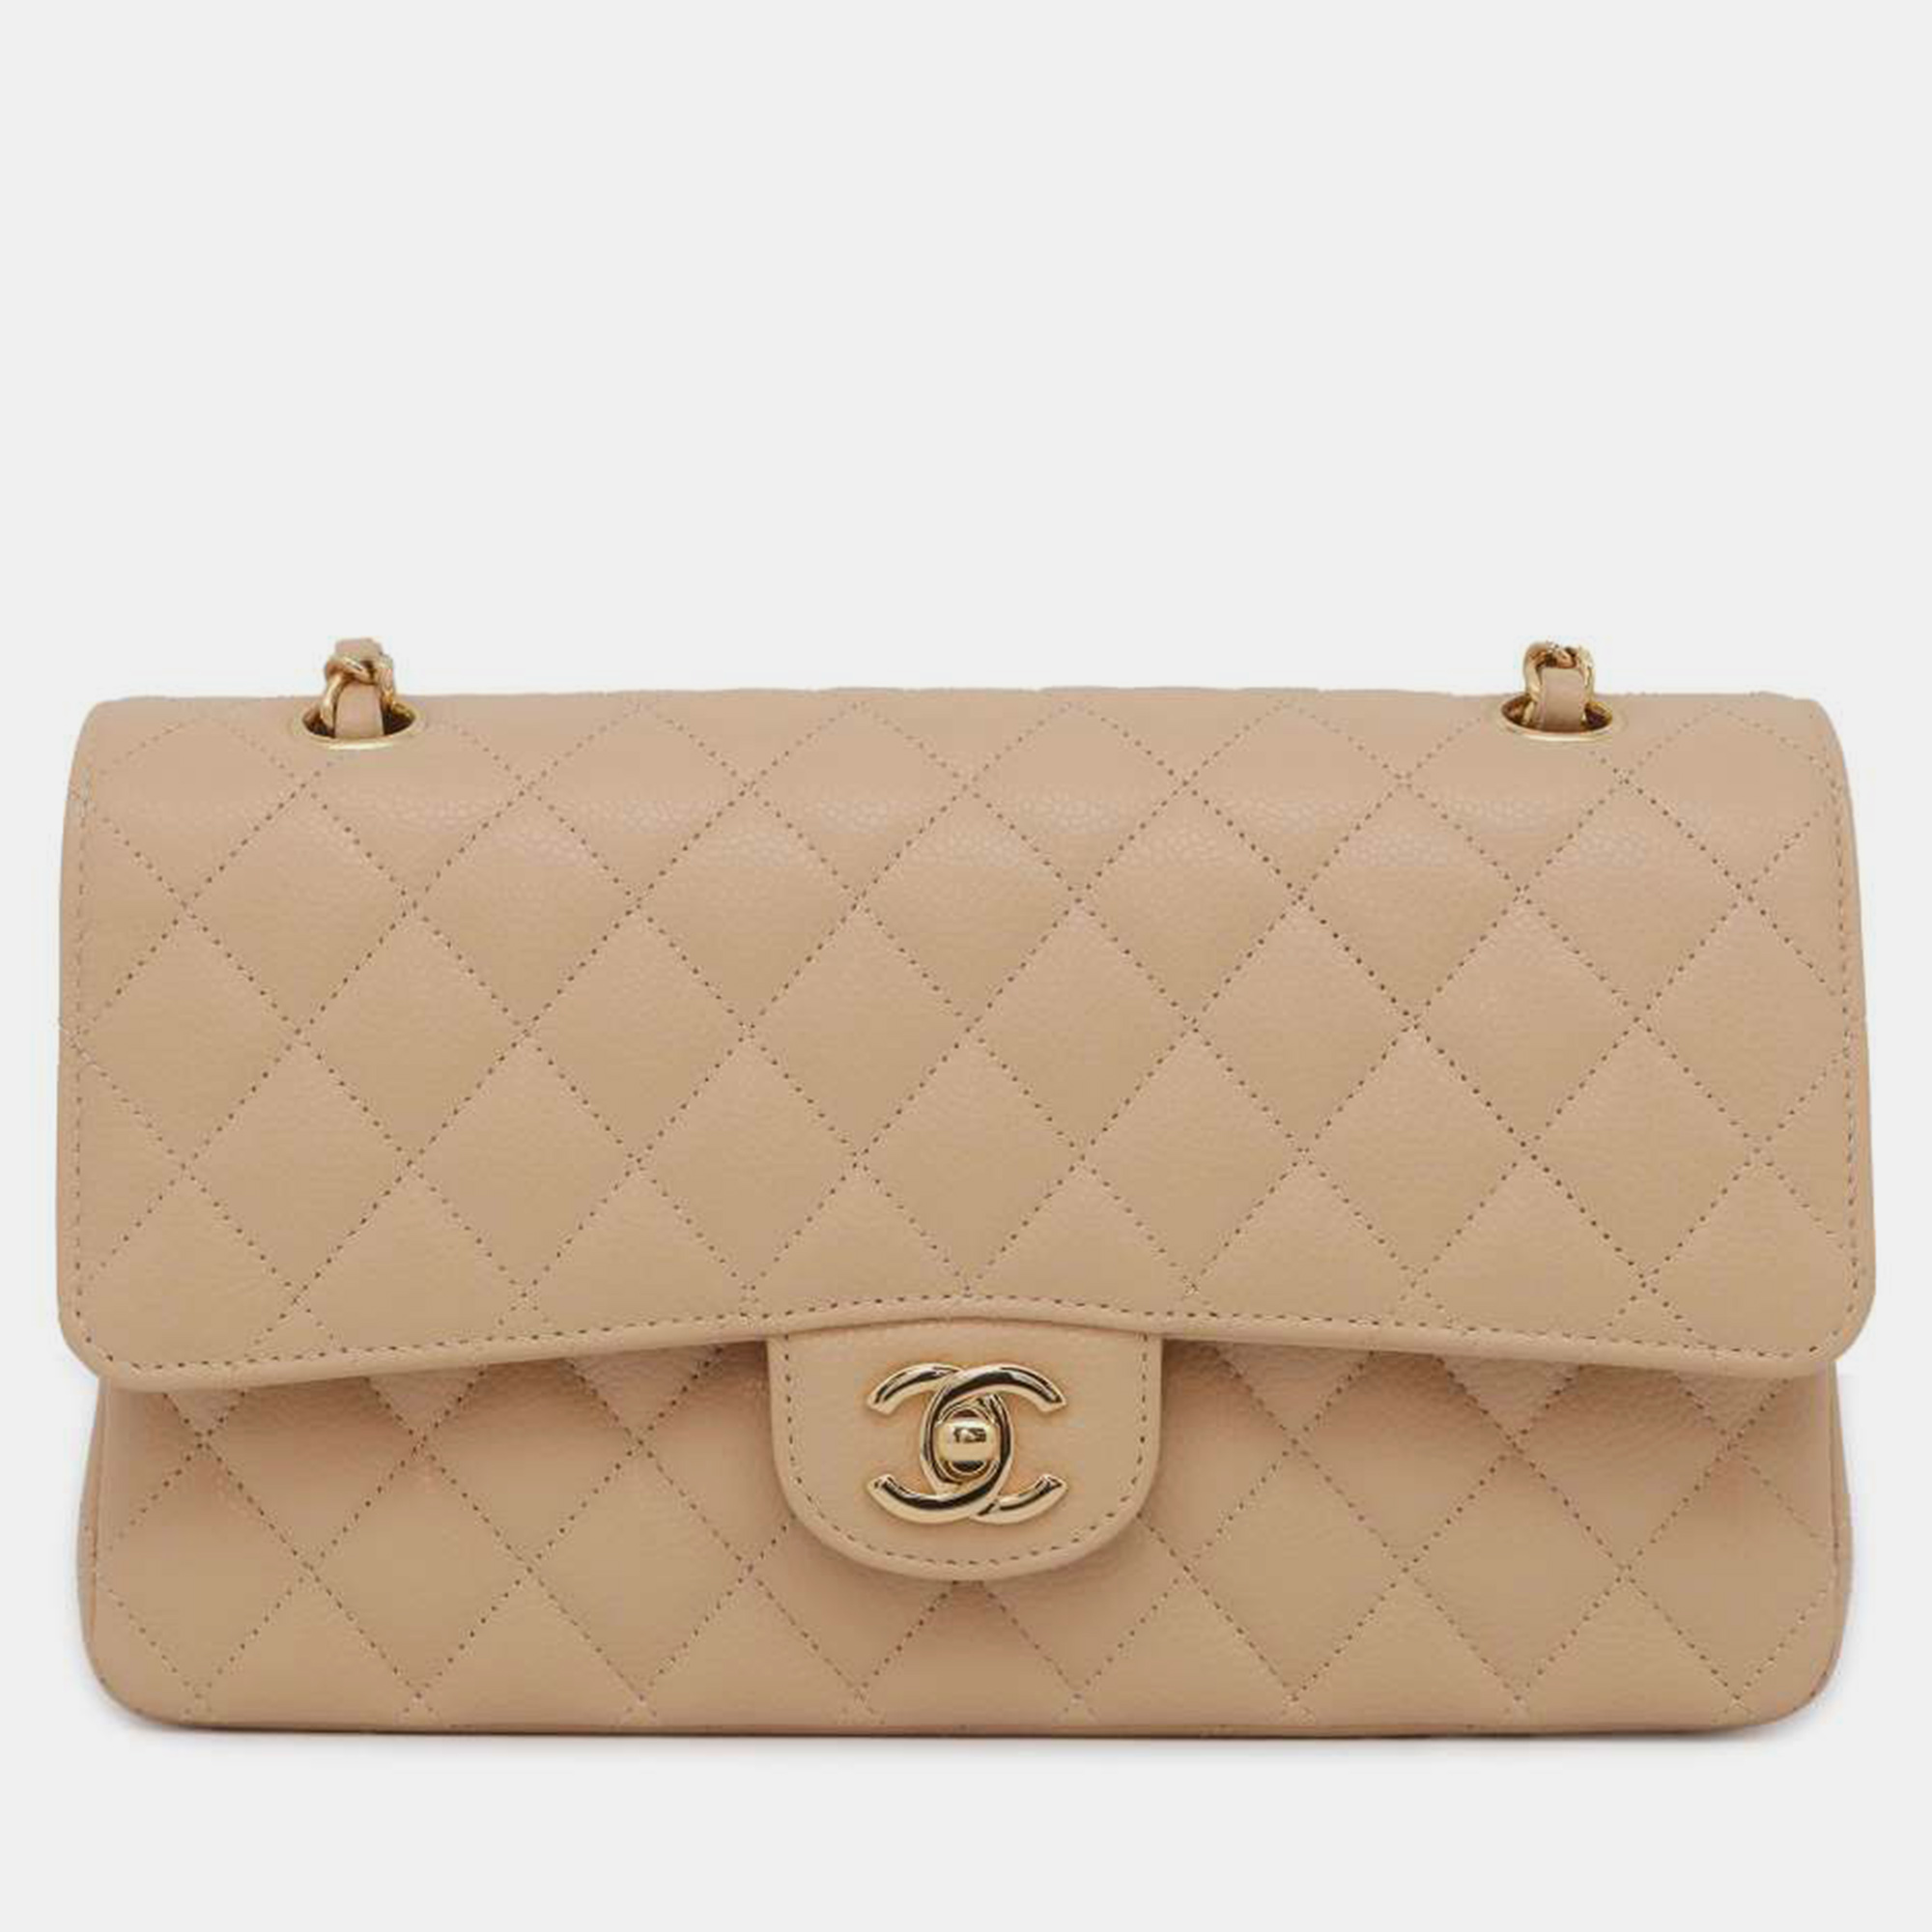 Chanel beige leather classic double flap bag